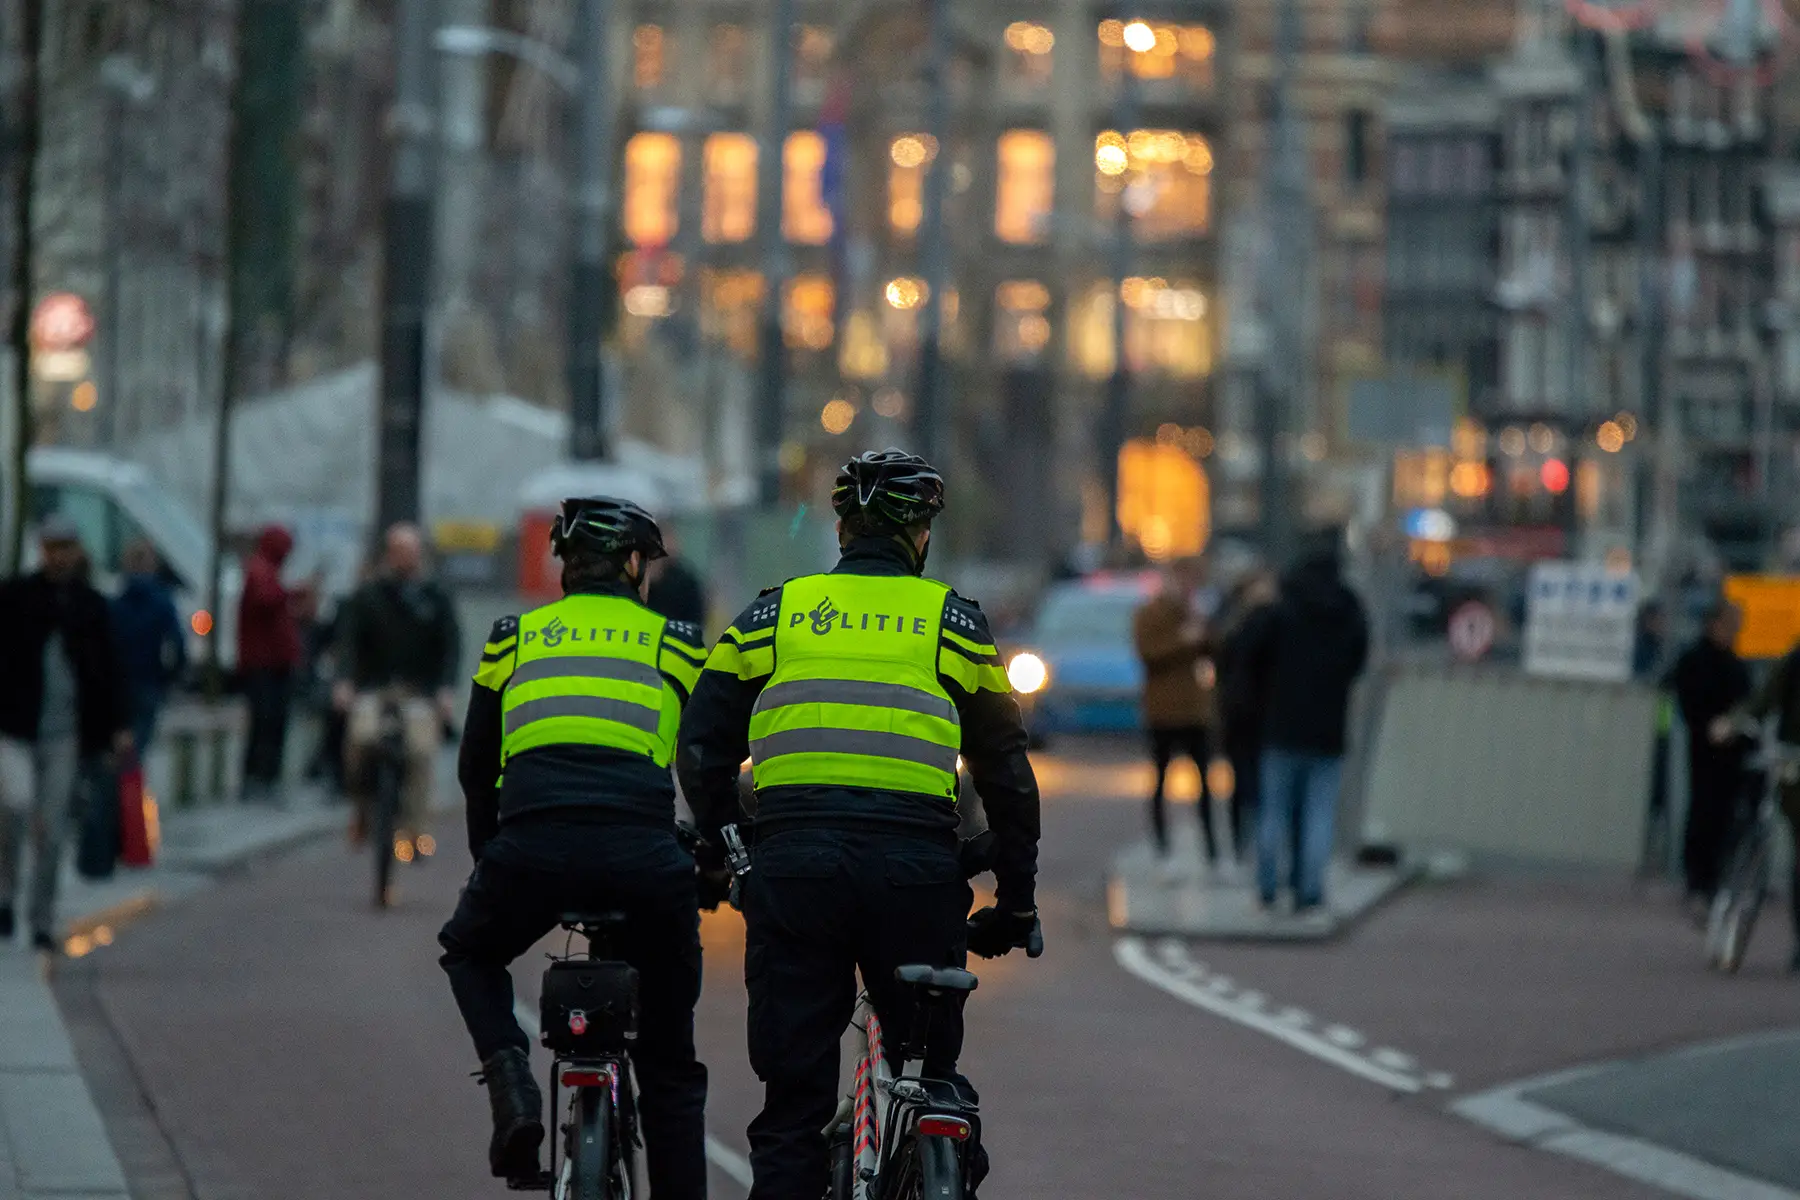 Police officers cycling in Amsterdam, the Netherlands